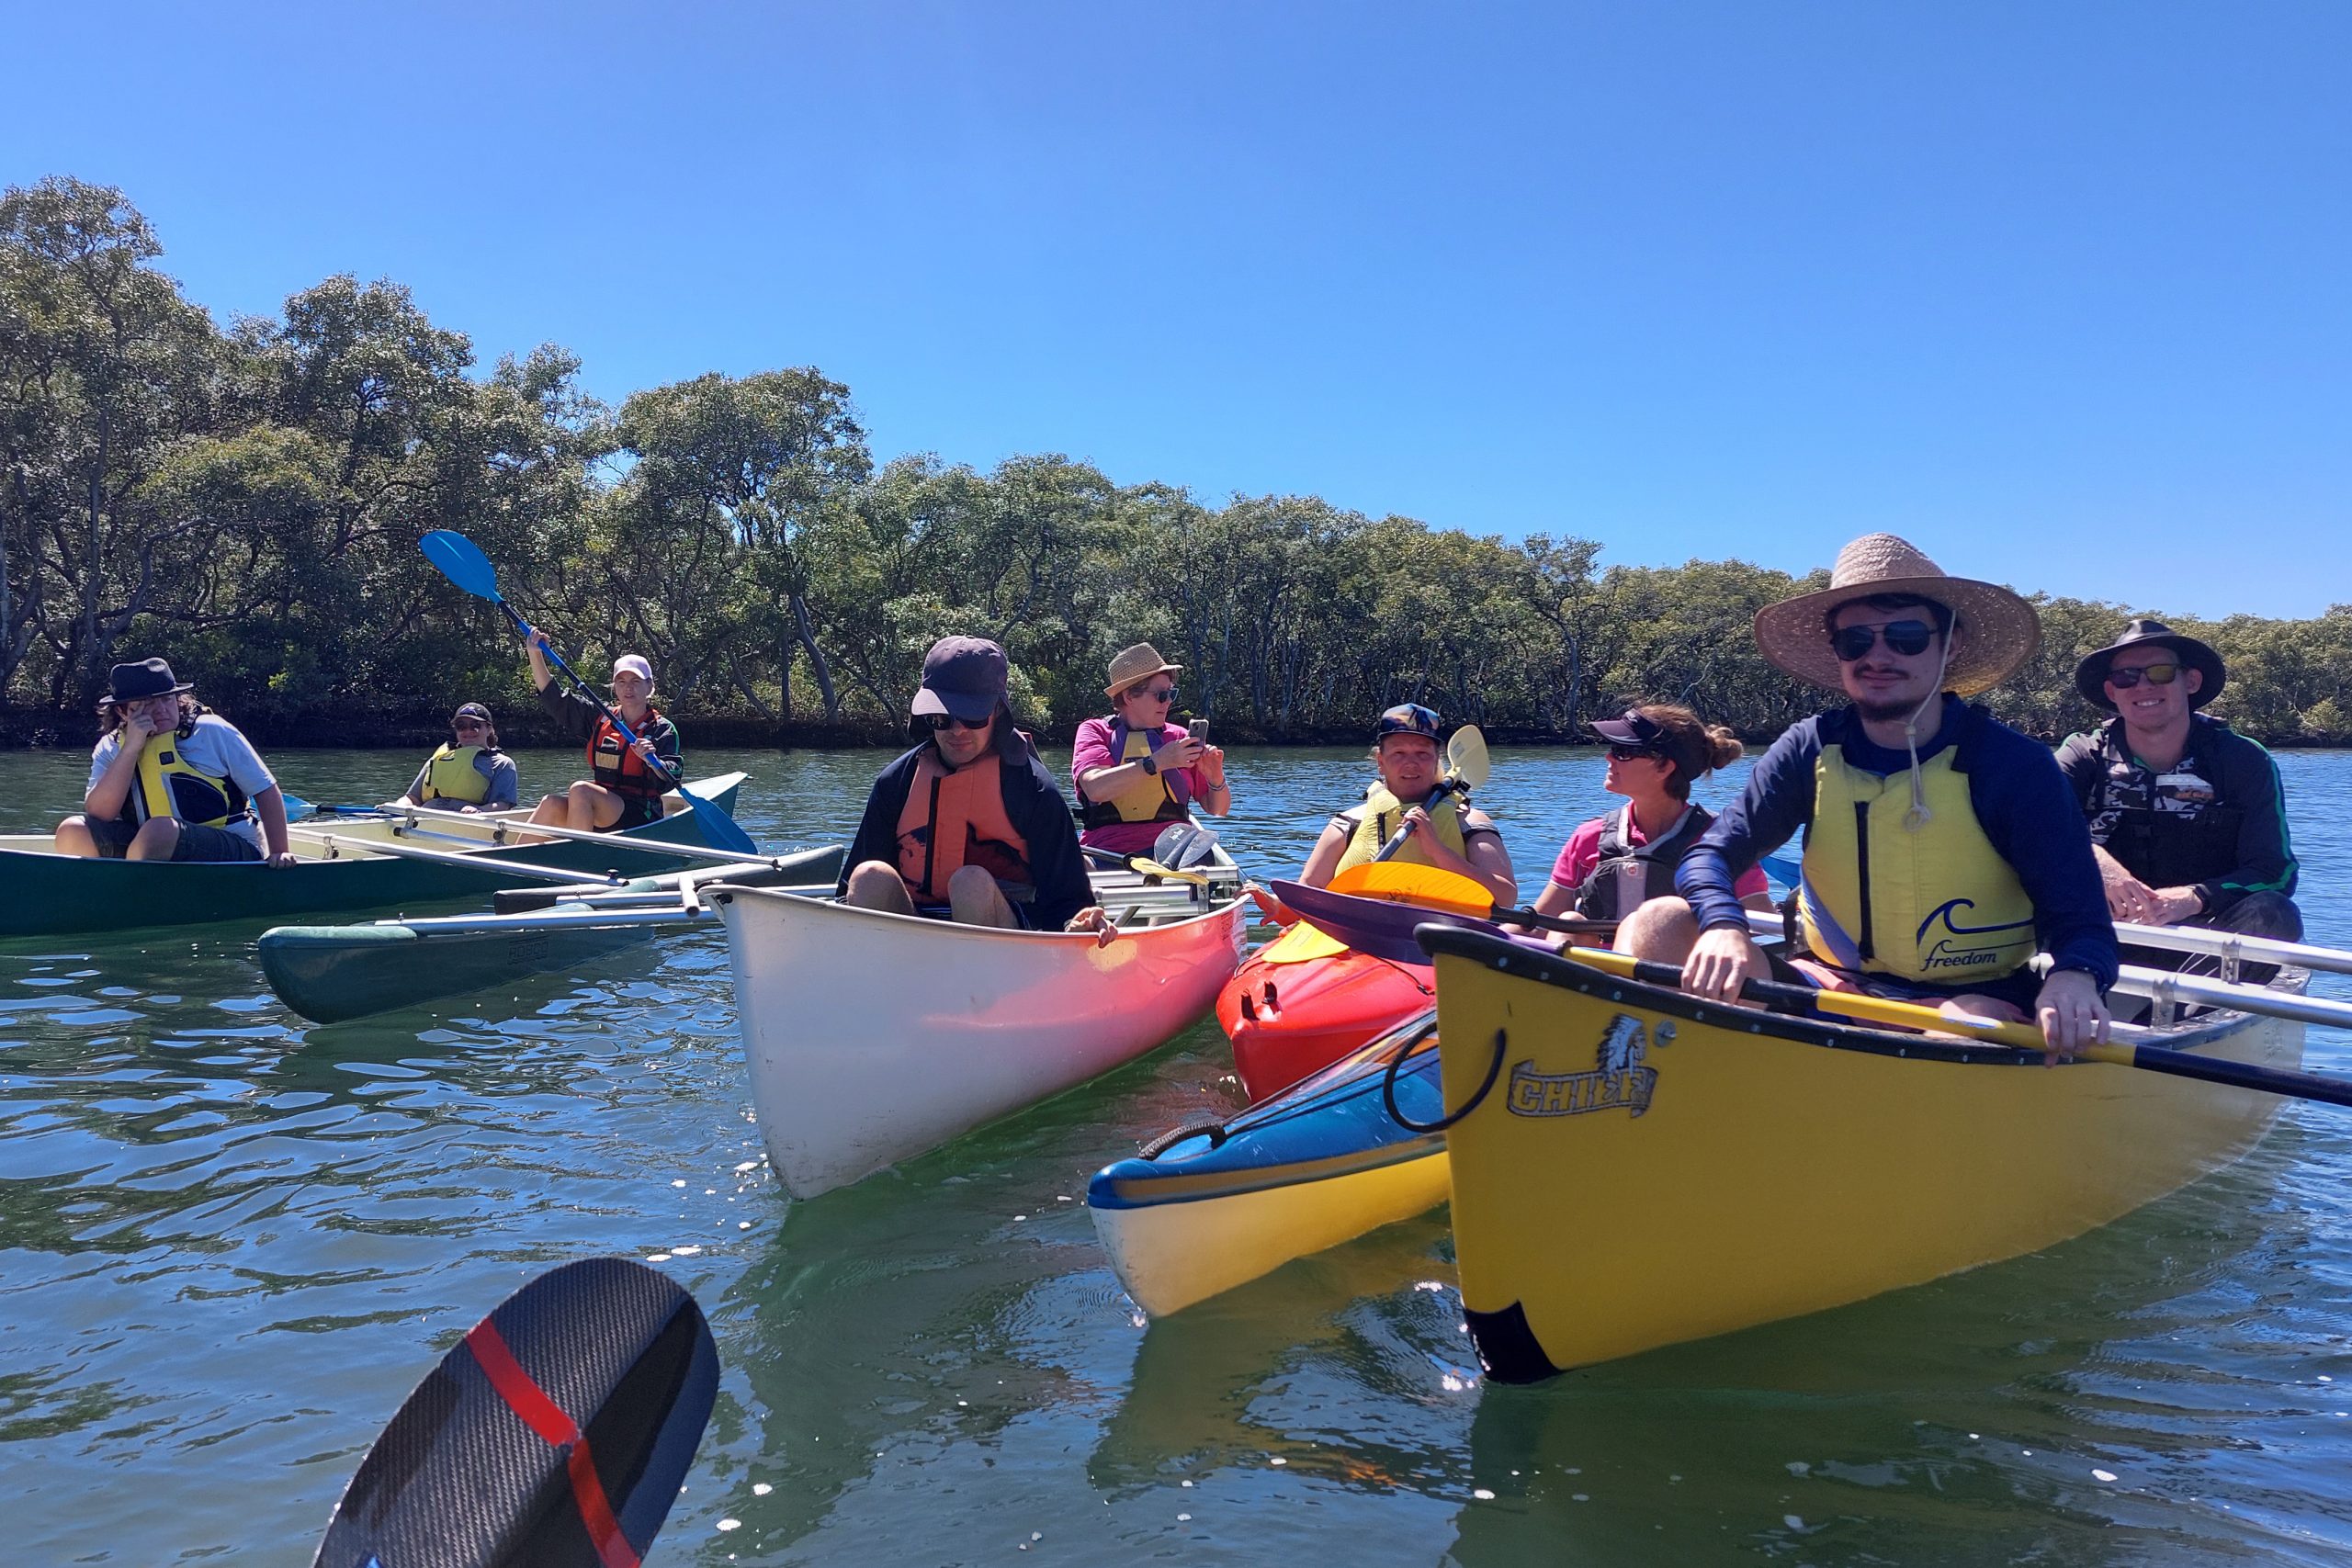 A group of nine people in hats and life jackets sitting in five different canoes and kayaks on the water under a clear blue sky.